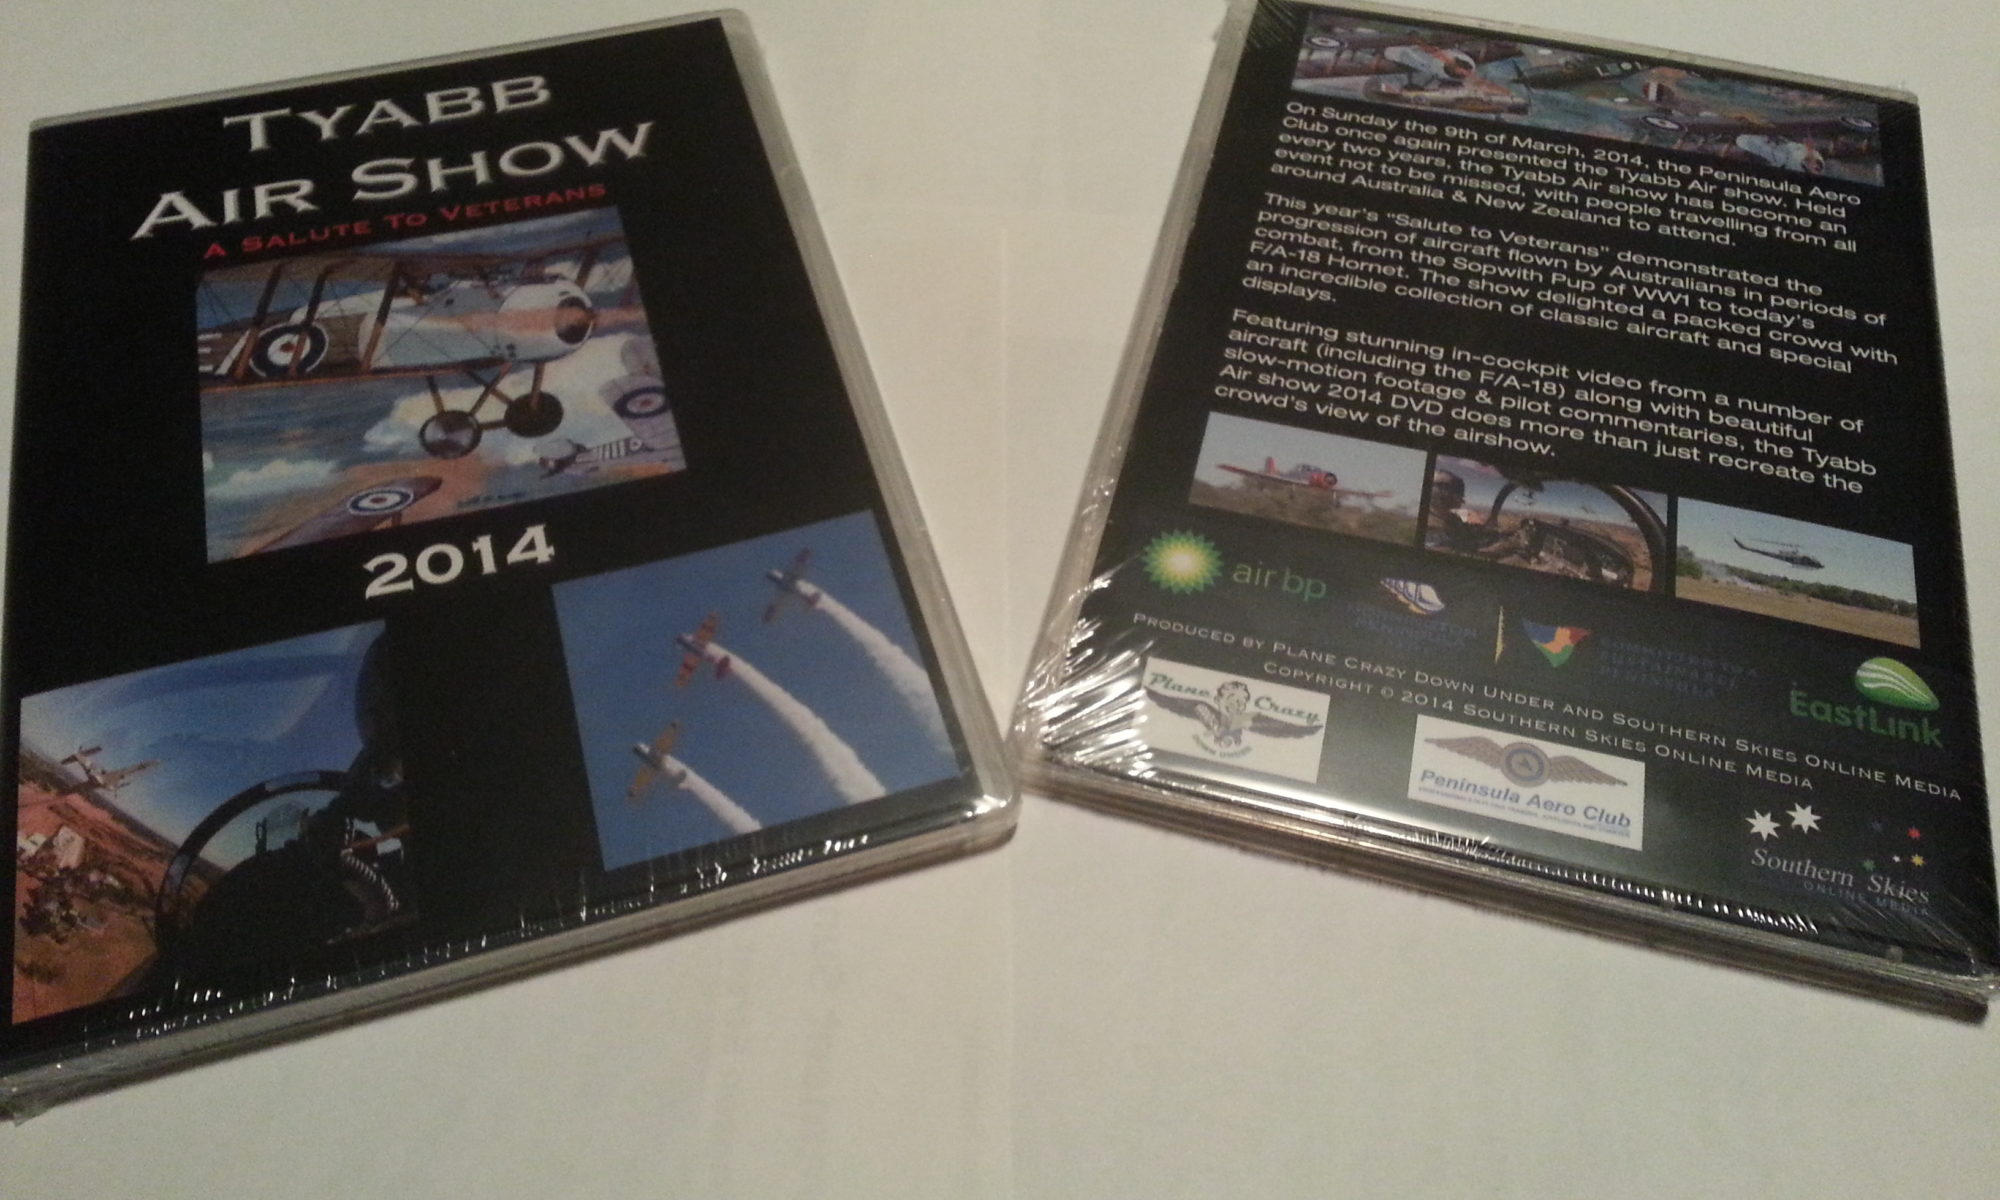 Tyabb Airshow 2014 DVD covers